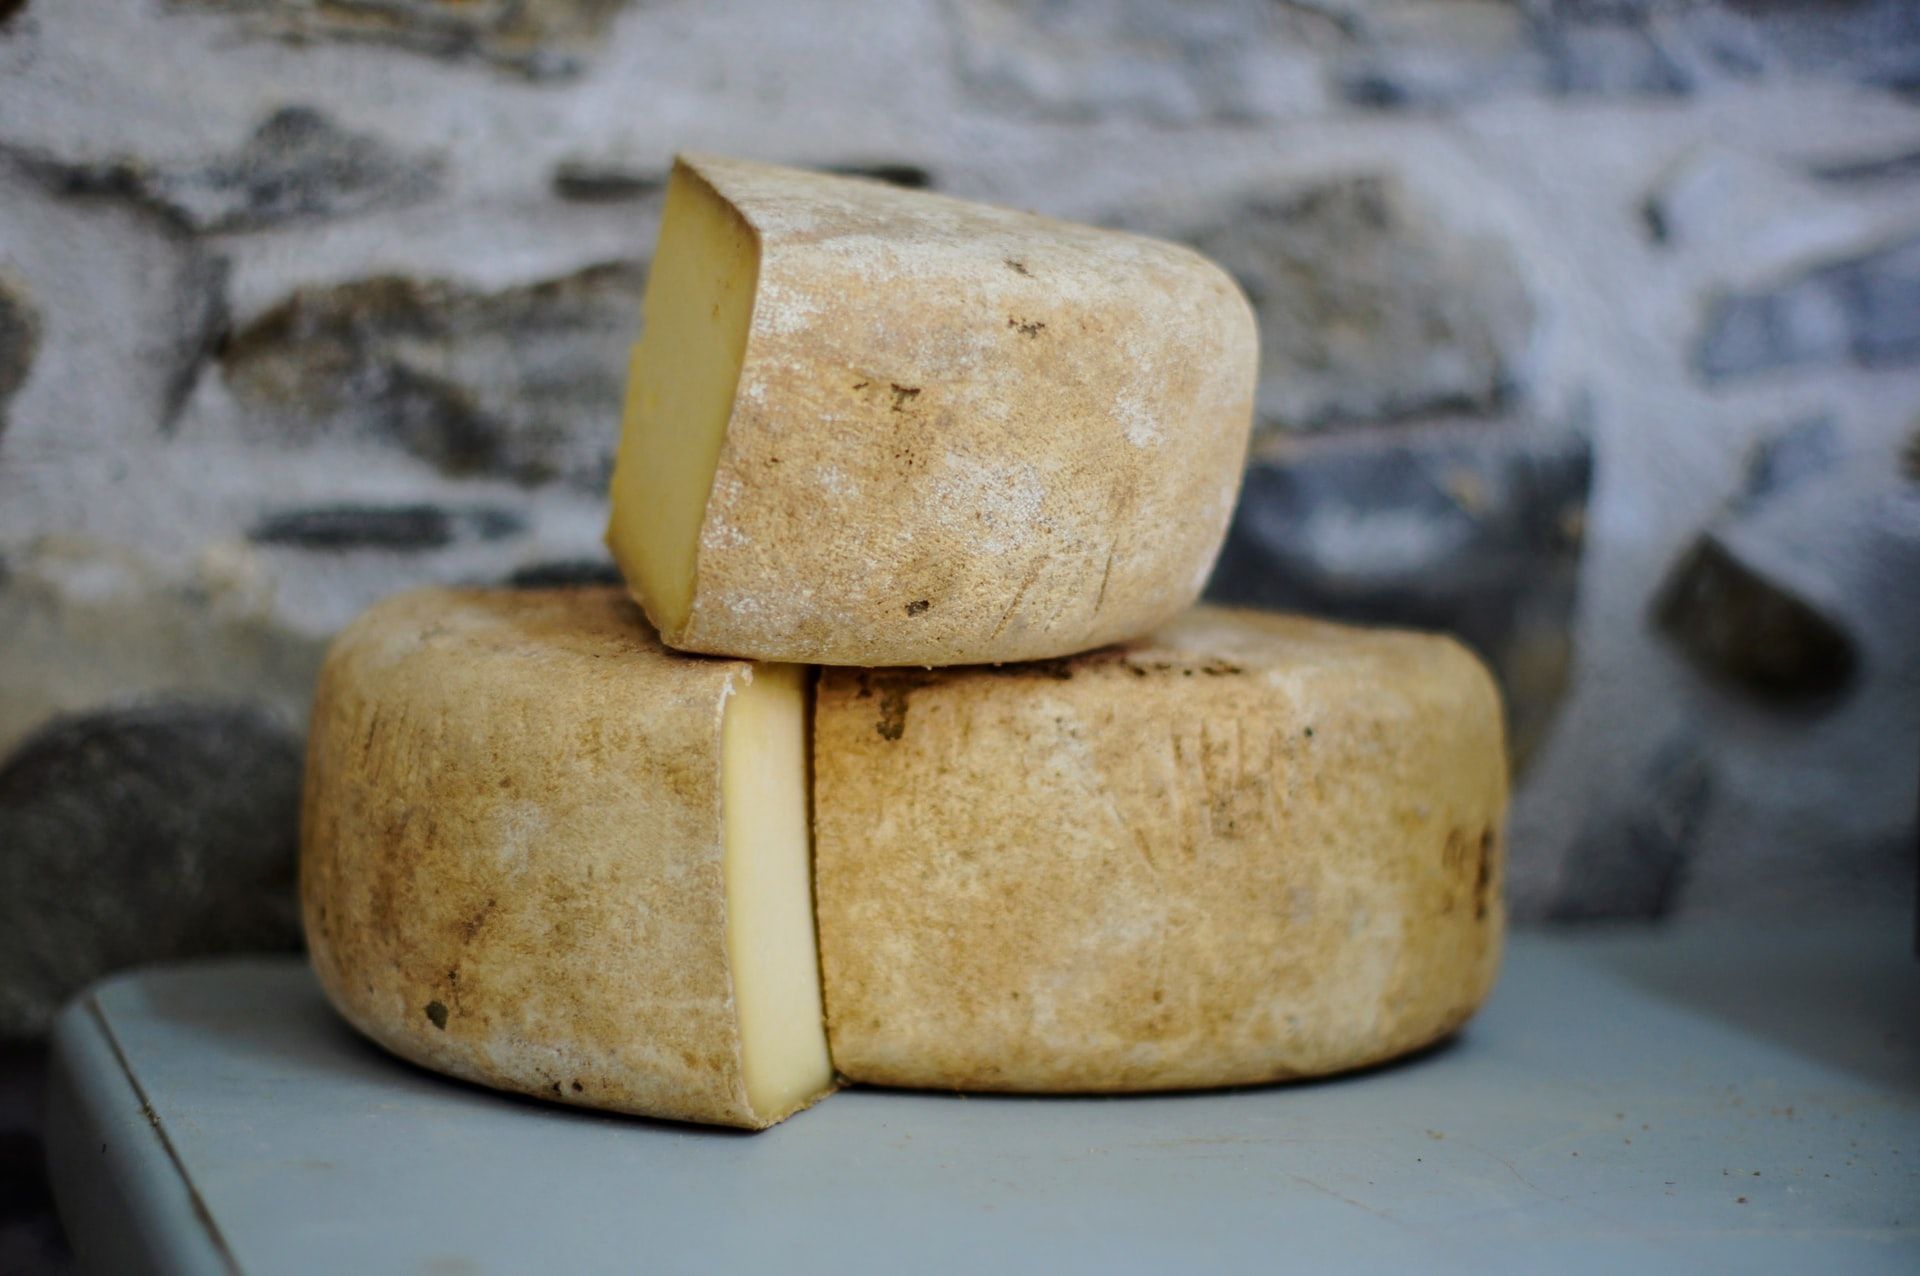 Fiore Sardo cheese is known for its smoky flavor.